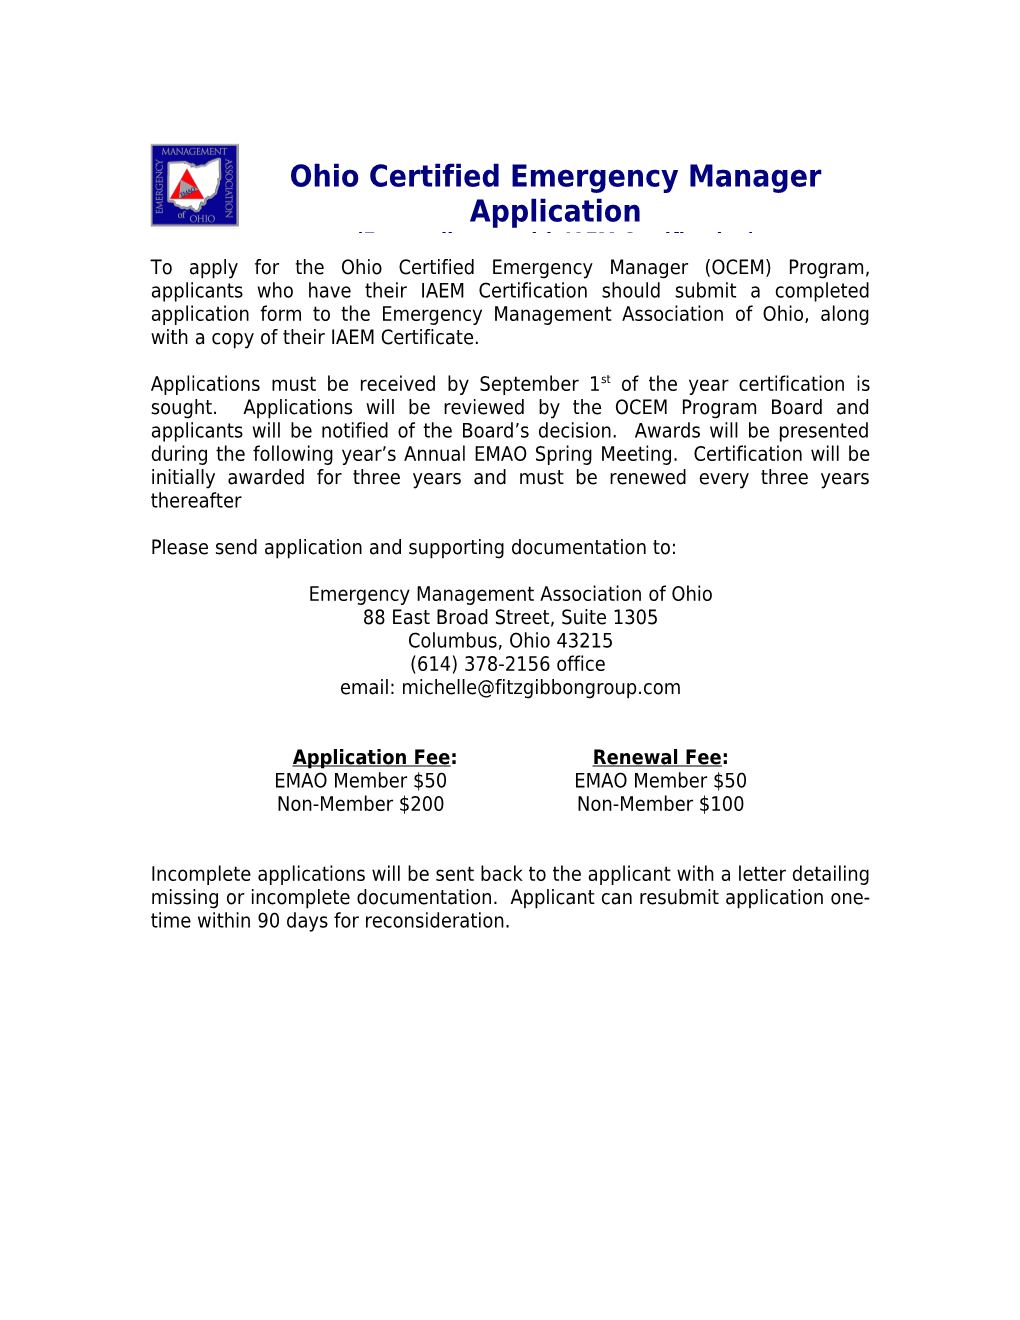 Ohio Certified Emergency Manager